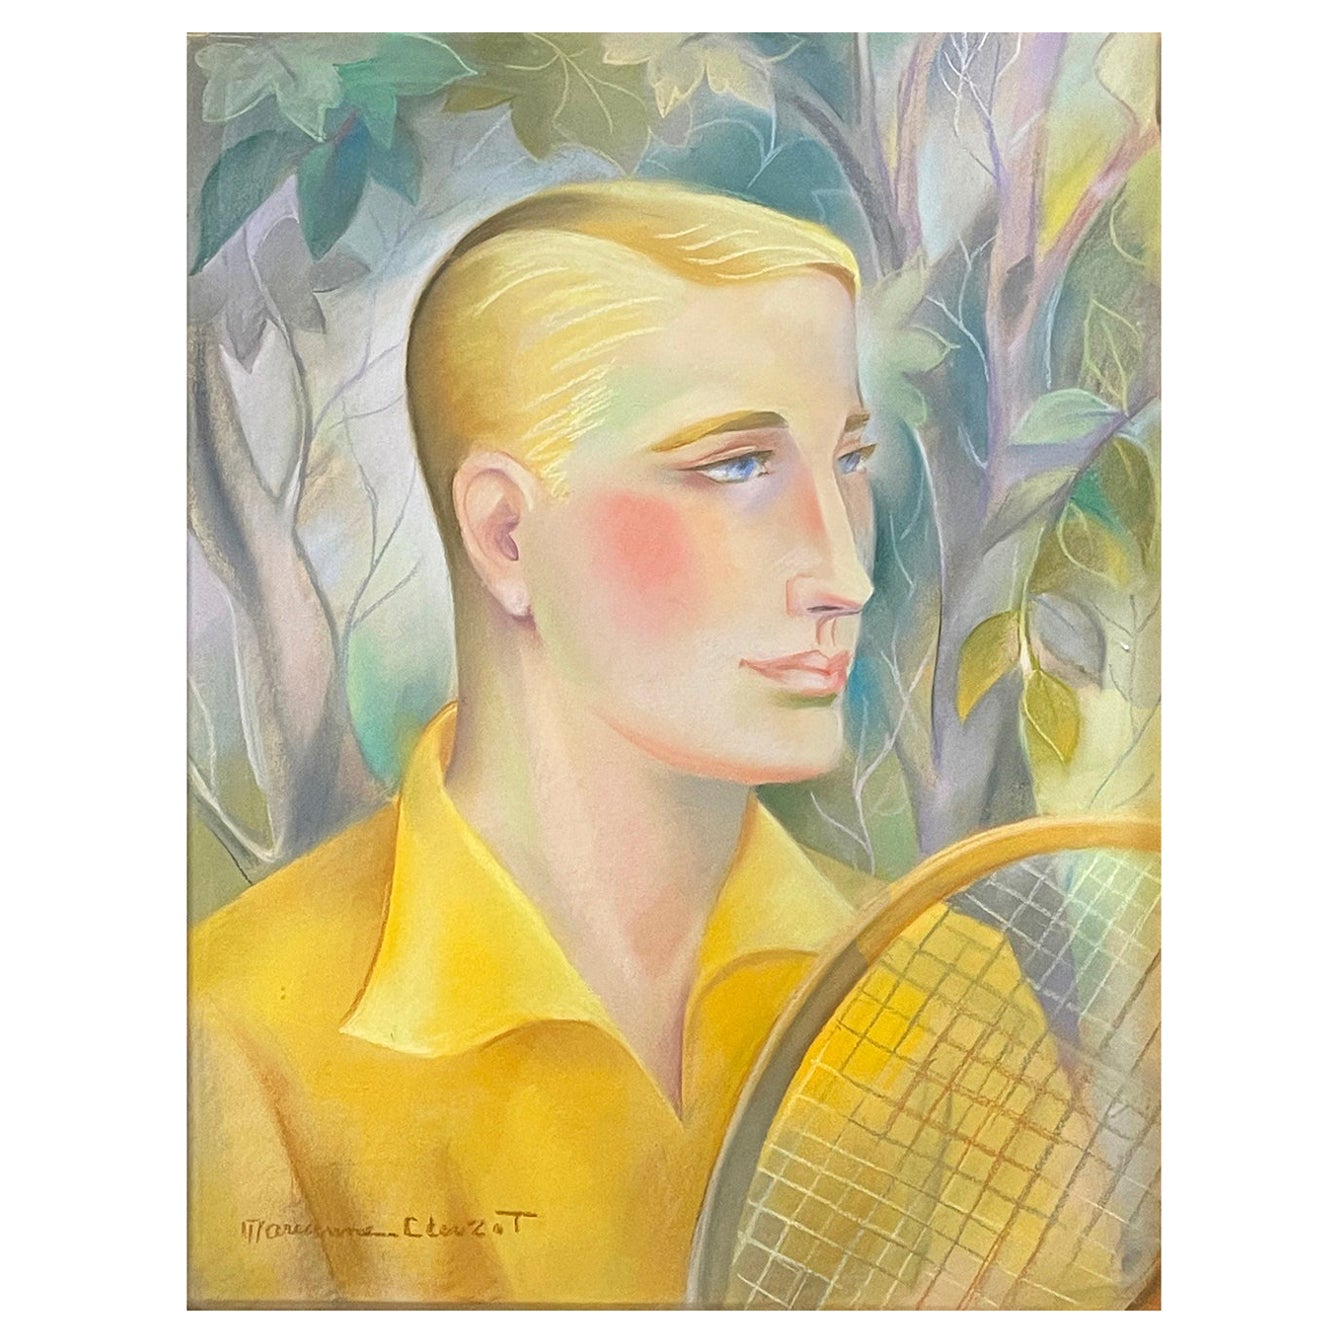 "Tennis Player in Canary Yellow, " Striking Art Deco Portrait of Blond Athlete For Sale